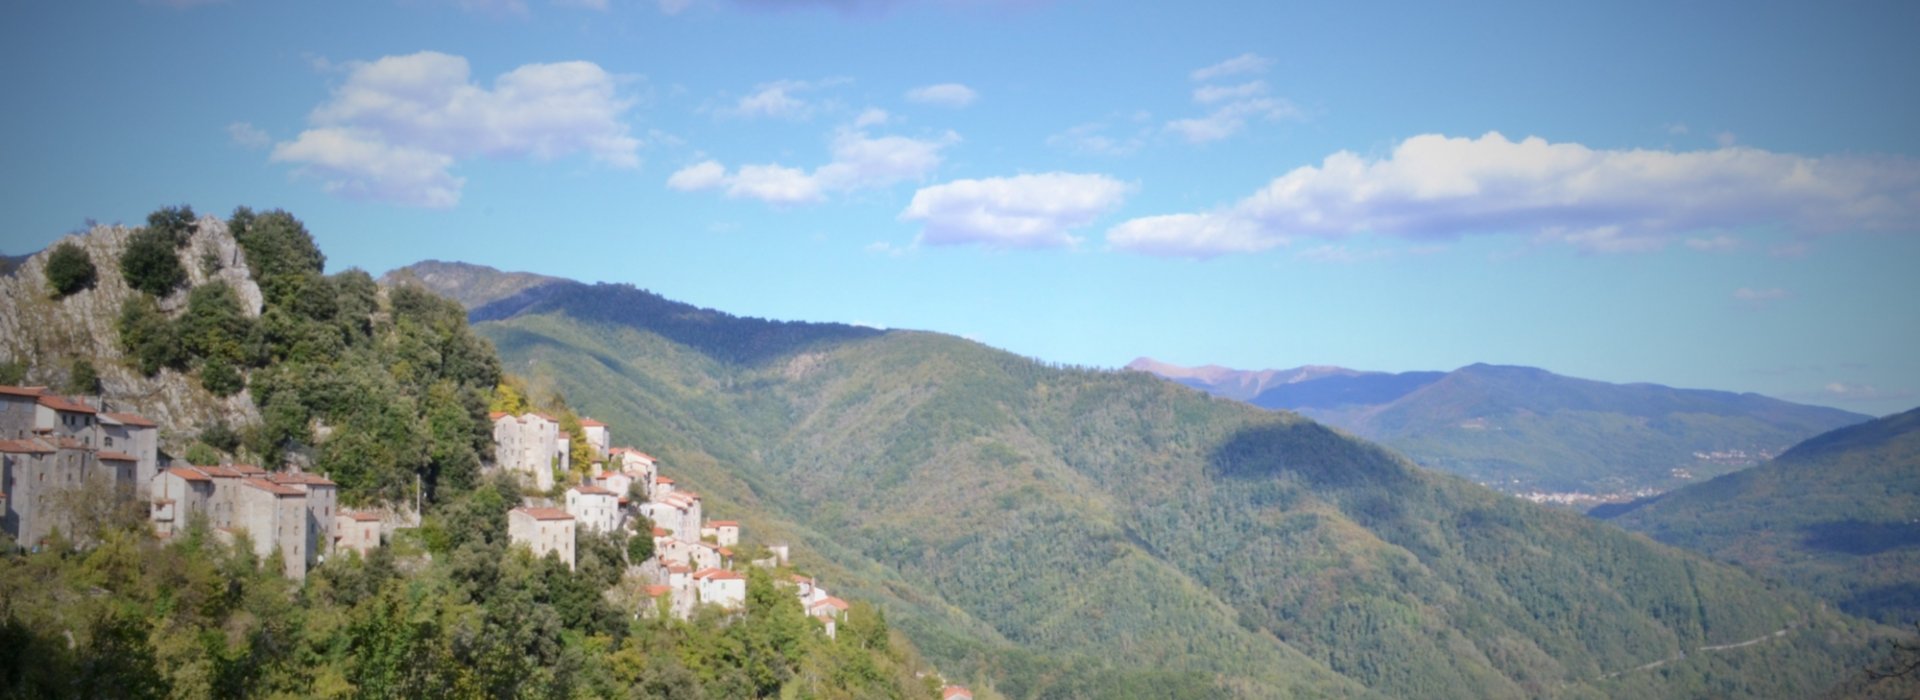 Trekking a Lucchio in Val di Lima (Lucca)